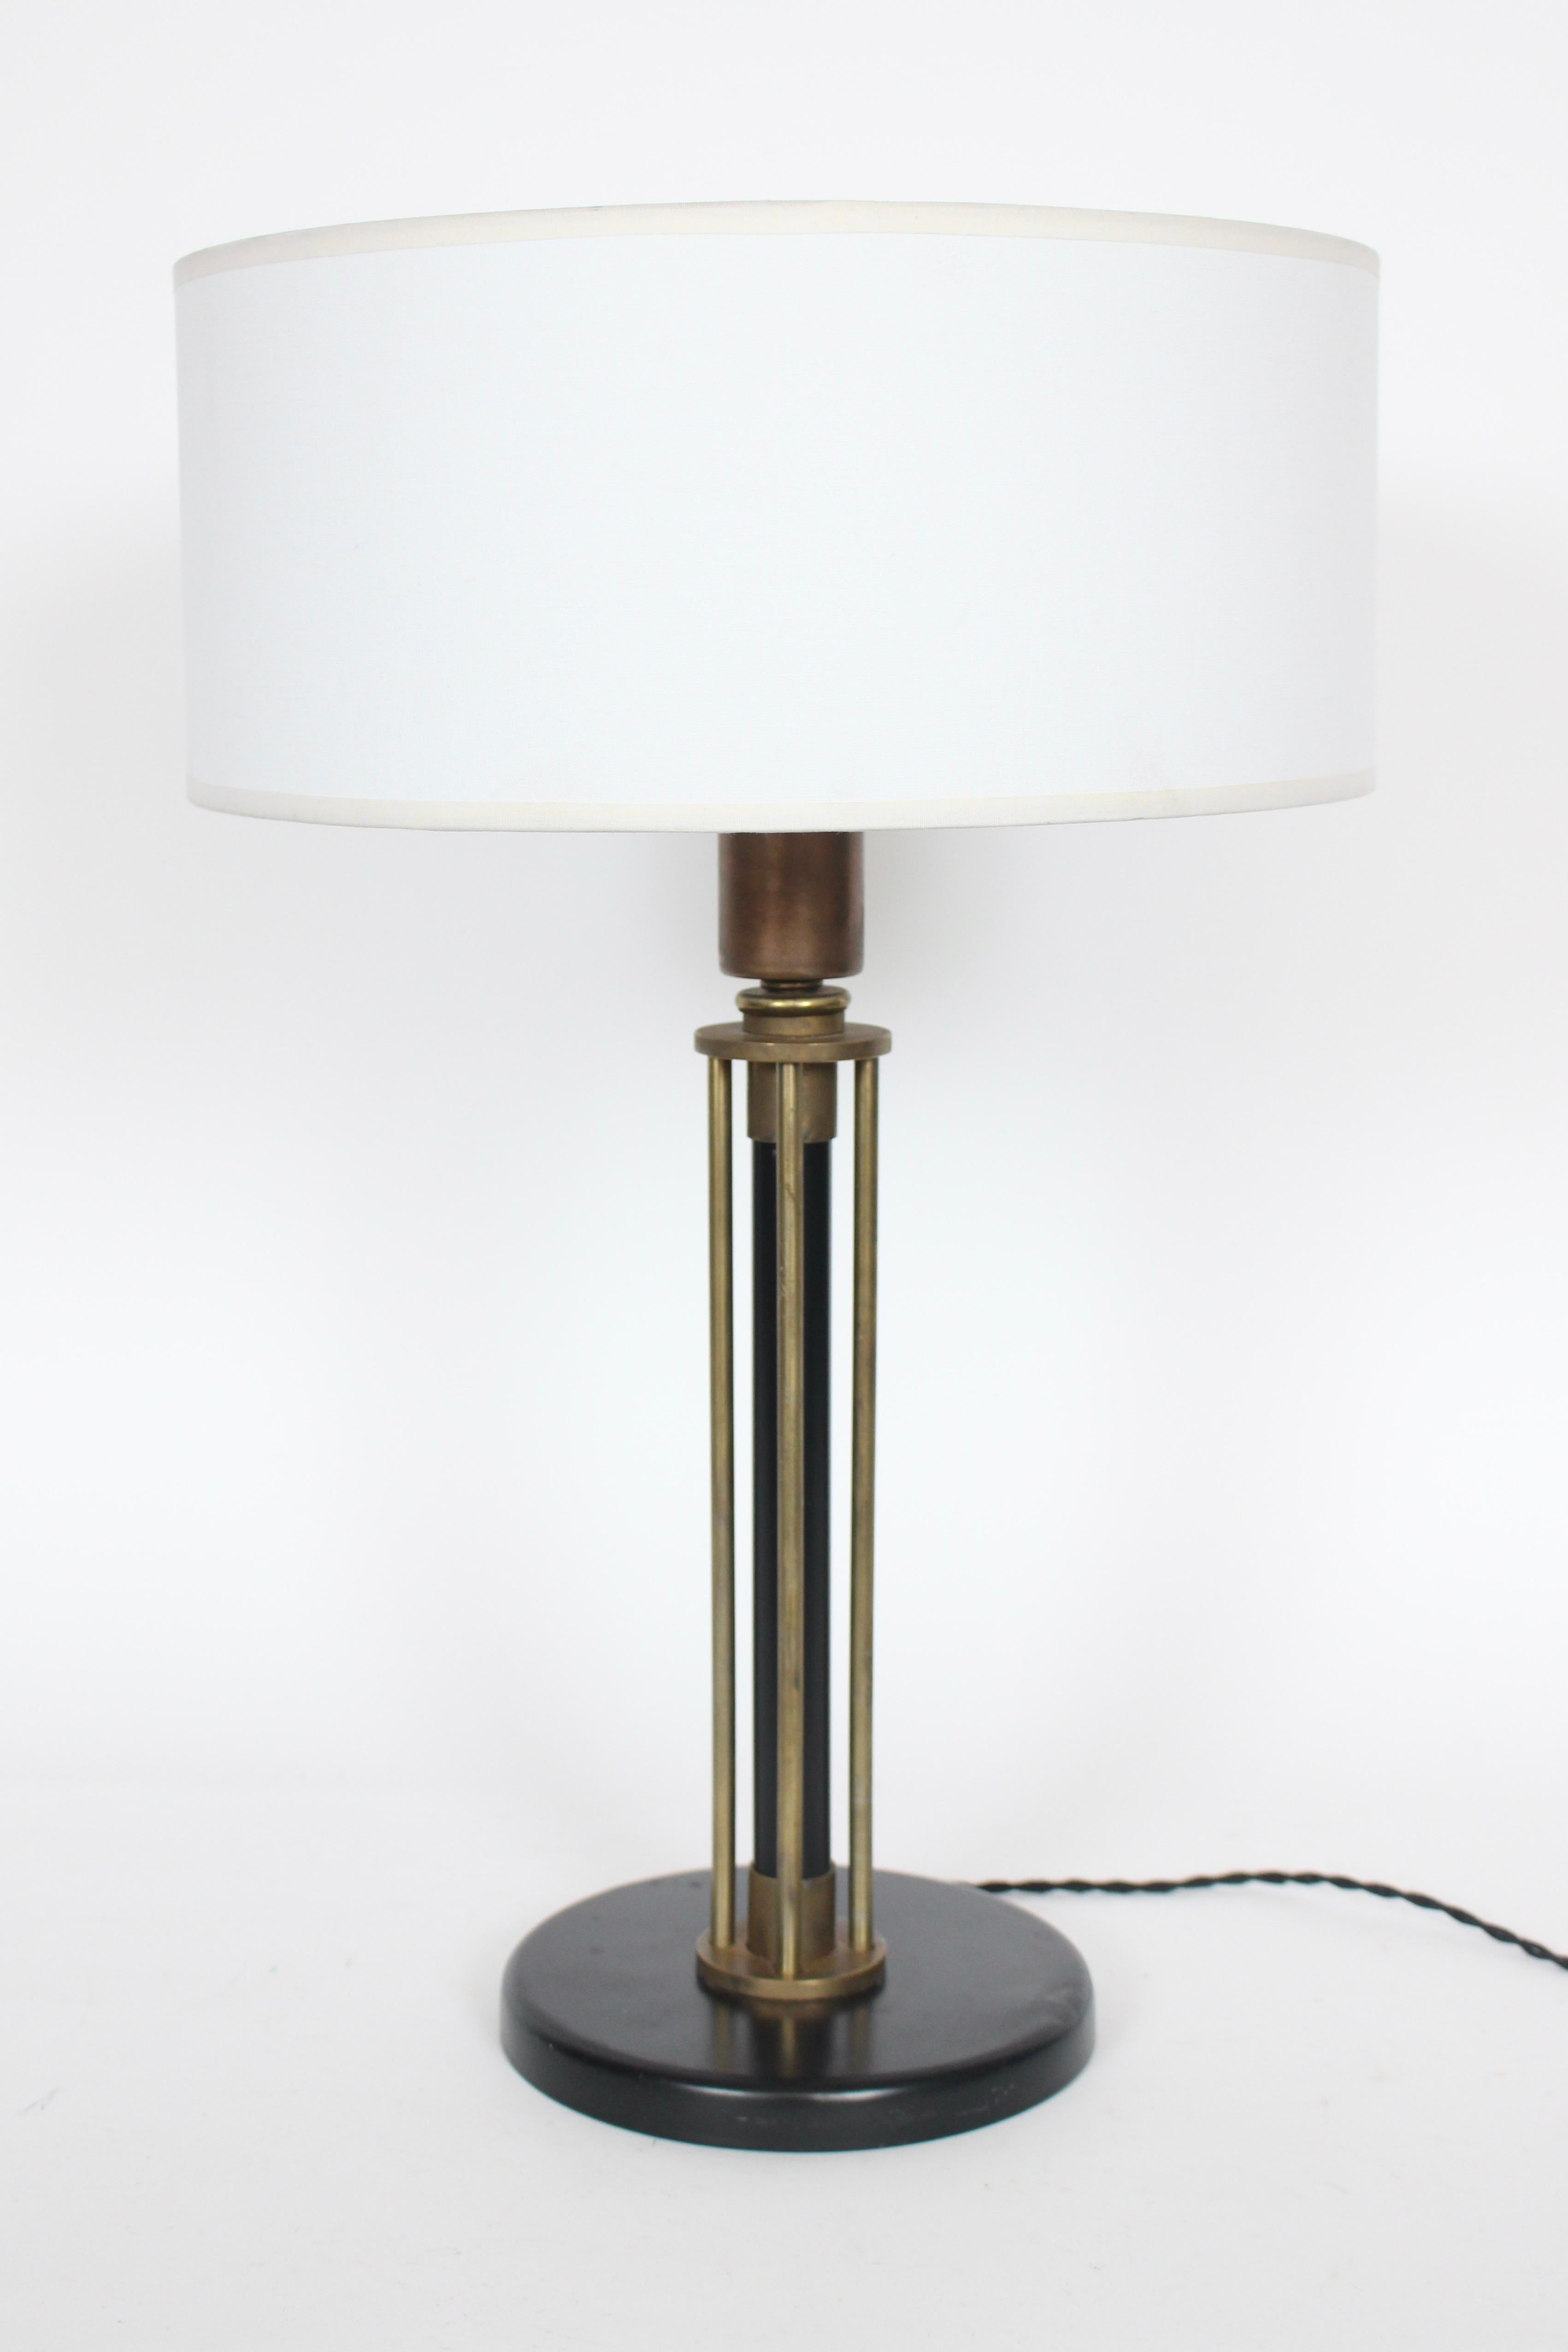 American Modernist Walter Von Nessen attributed brass column table lamp. Featuring an open five column architectural framework, with tubular Black enameled Brass center and four surrounding round Brass columns. With color variation to Brass neck. A